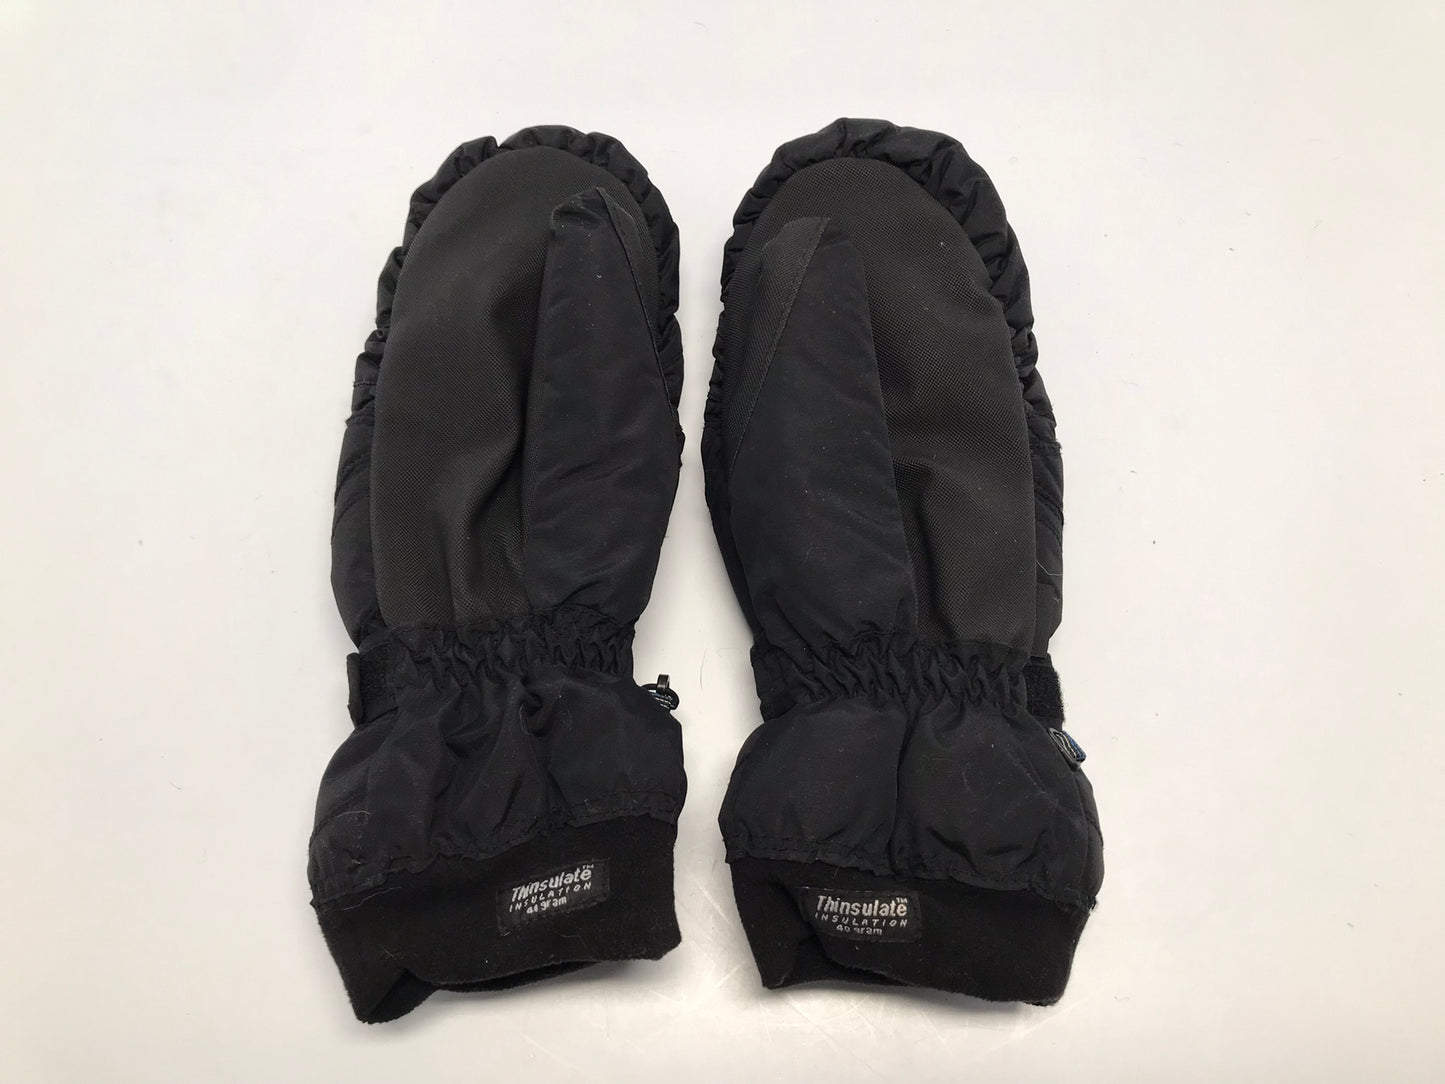 Winter Gloves and Mitts Men's Size Medium Auclair Black Outstanding Quality Made In Quebec